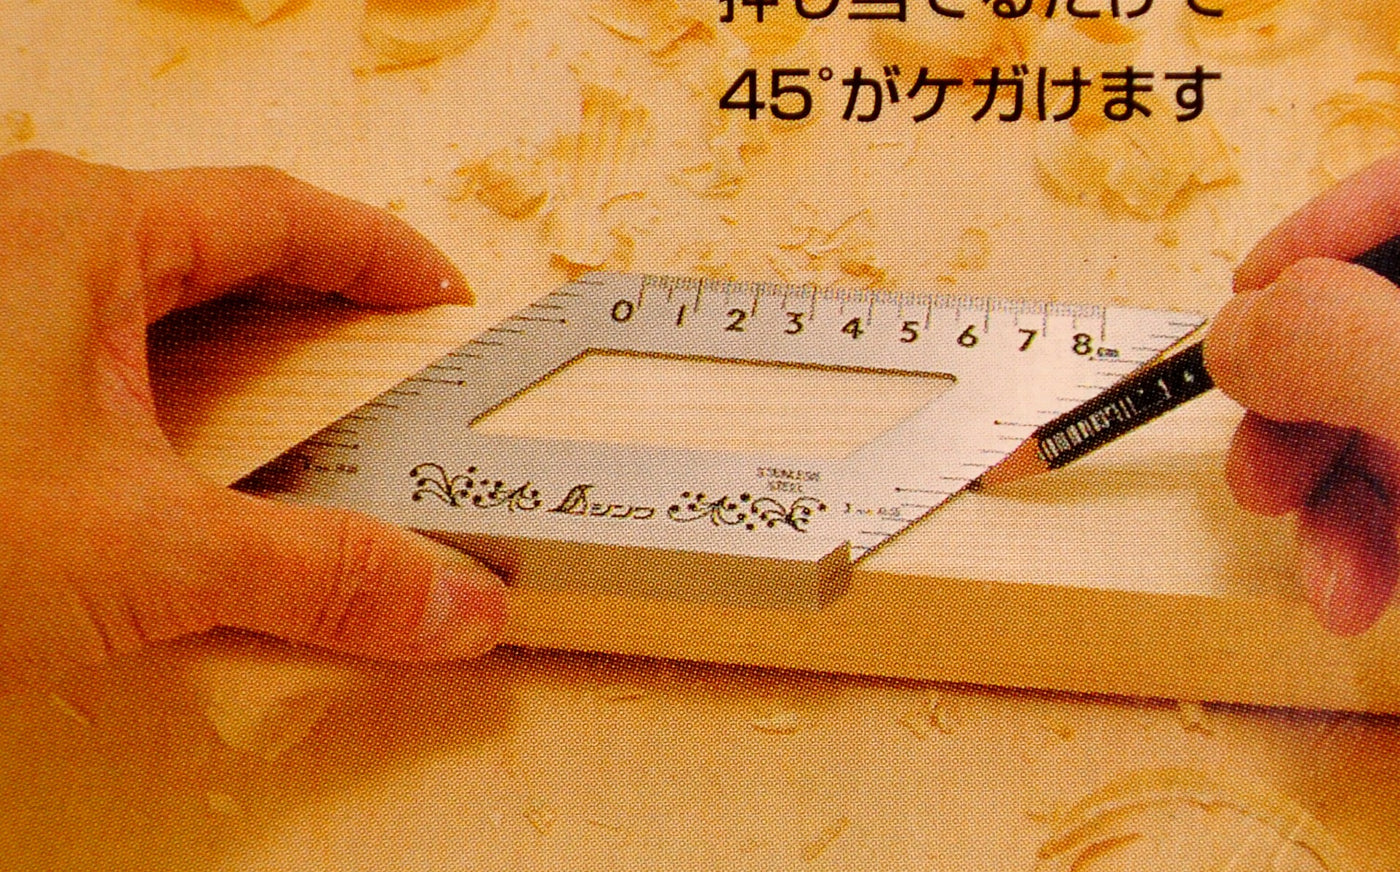 30cm Stainless Steel Right Angle Ruler 45/90 Woodworking Try